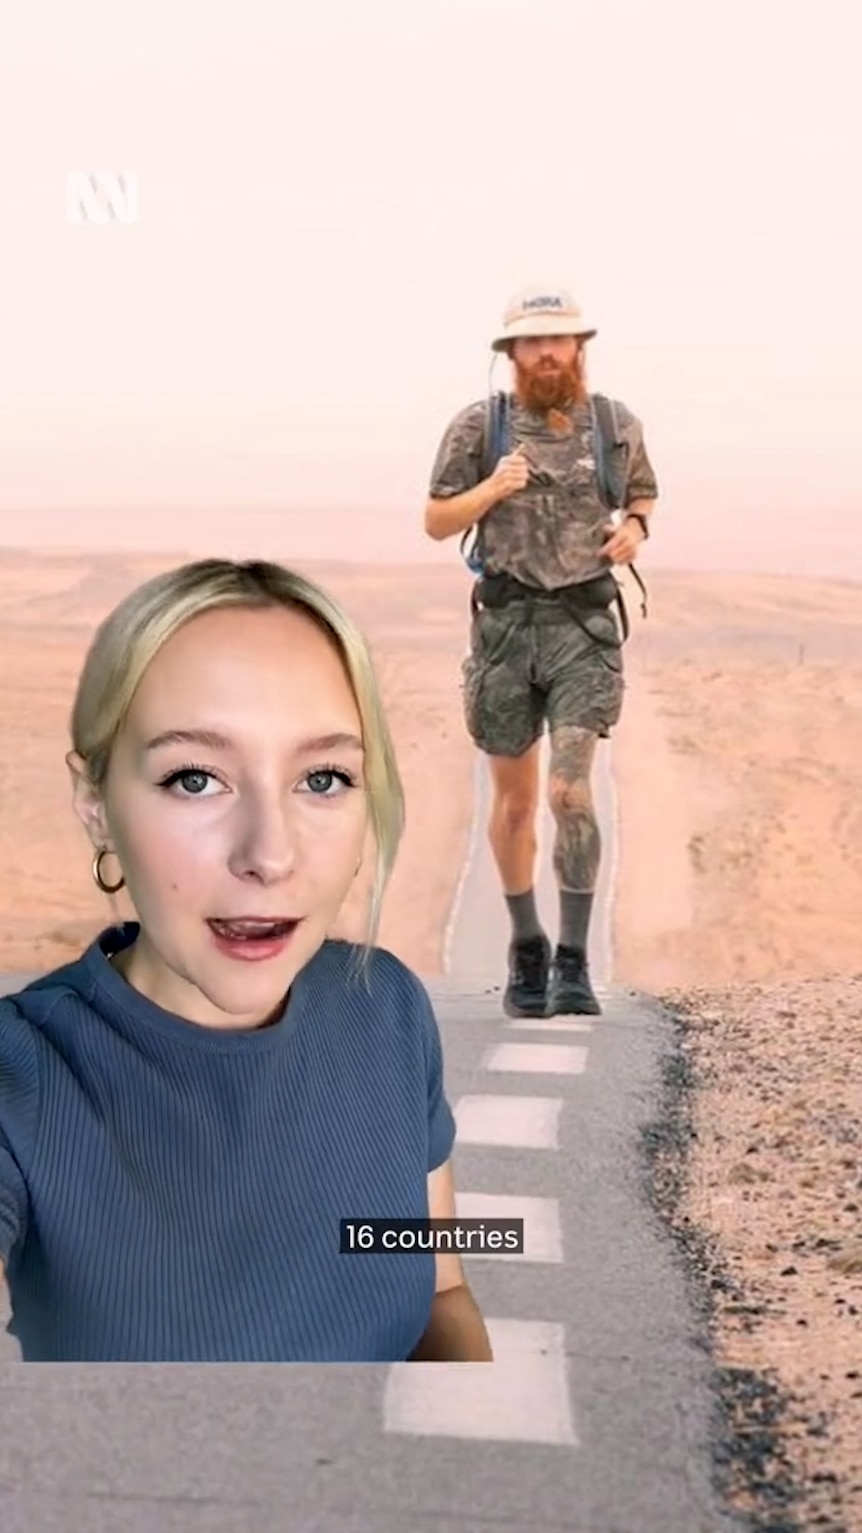 Female presenter looks at screen with background of a man running on a dirt road behind her